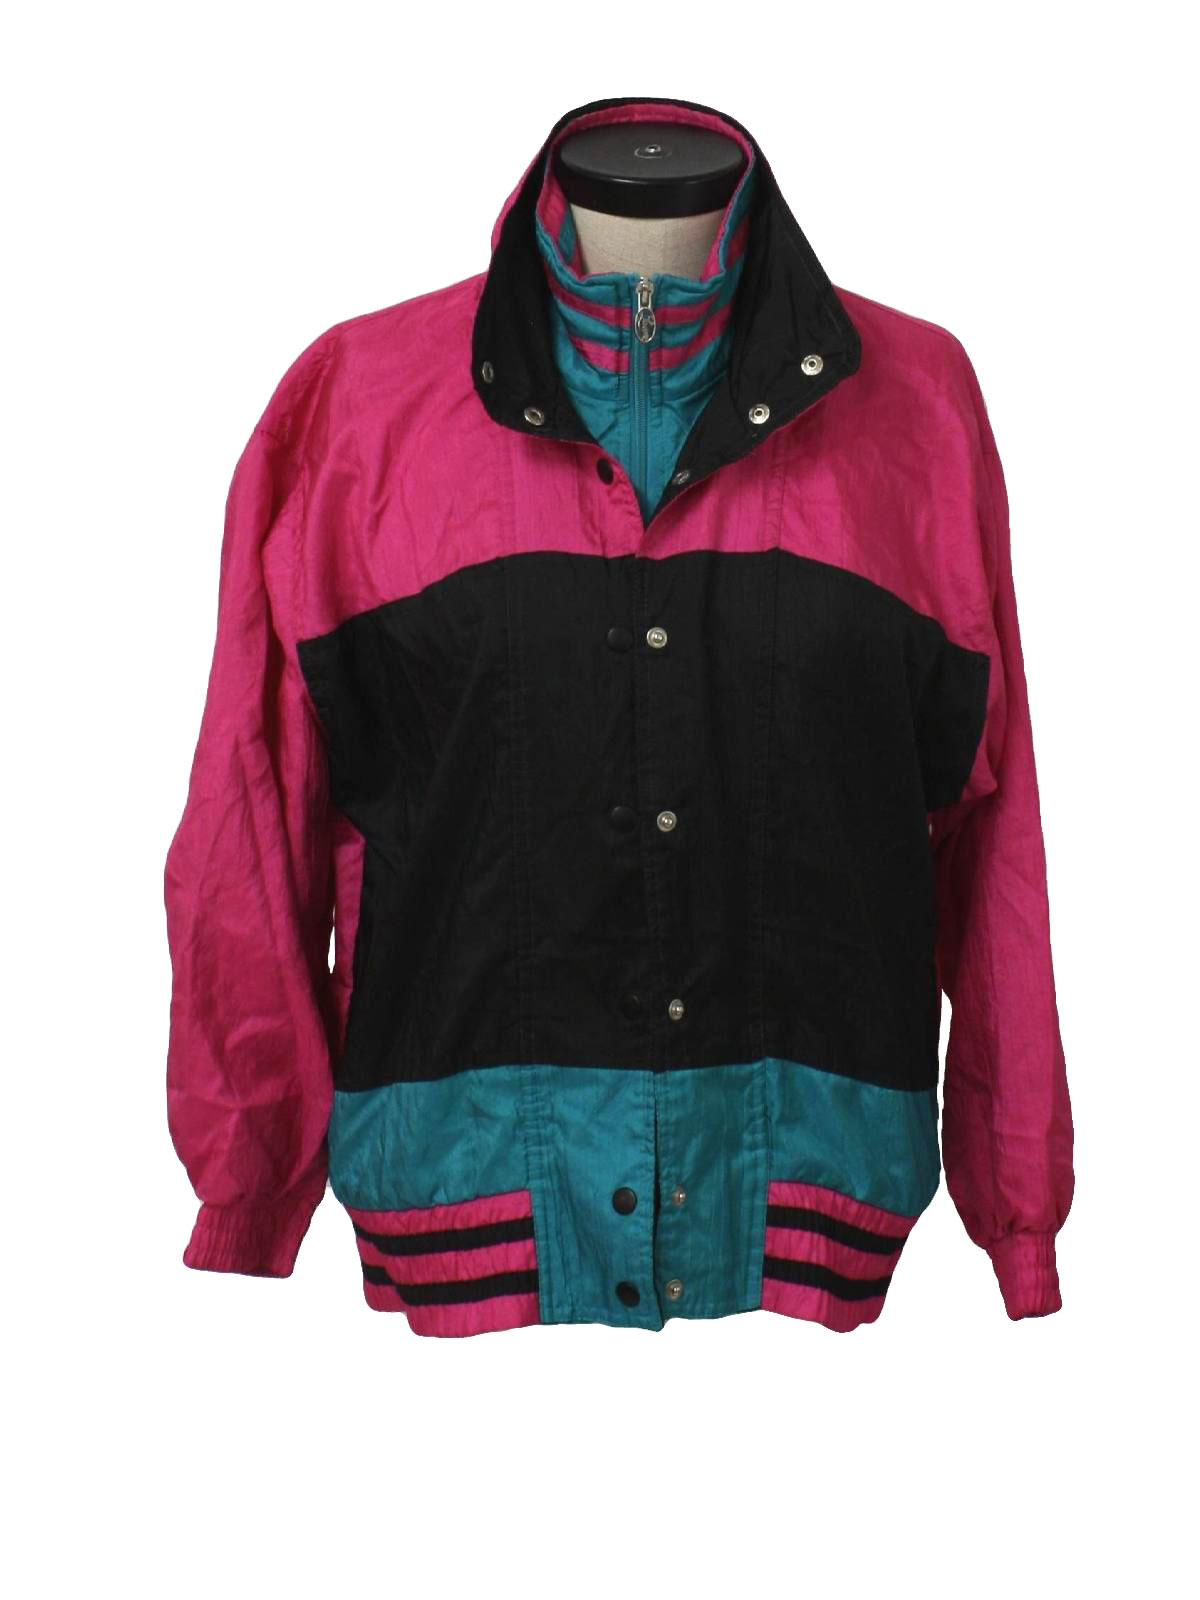 Vintage 1980's Jacket: 80s -Lavon- Womens black background with teal ...